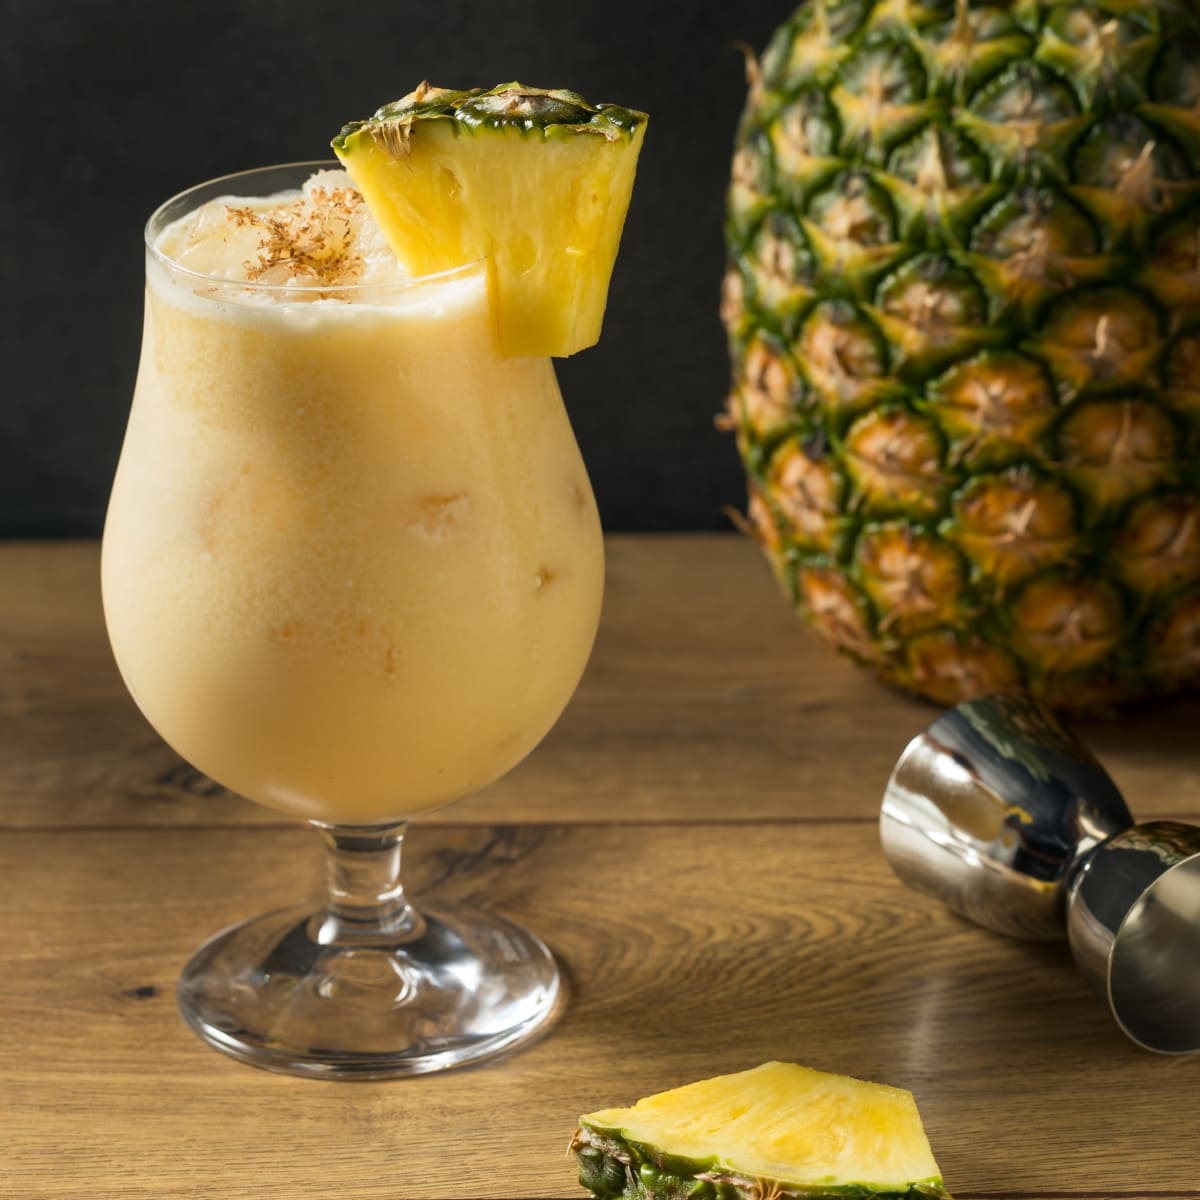 Whole pineapple and a glass of Painkiller Cocktail garnished with pineapple slice on a wooden table with a jigger and a whole pineapple to the right side